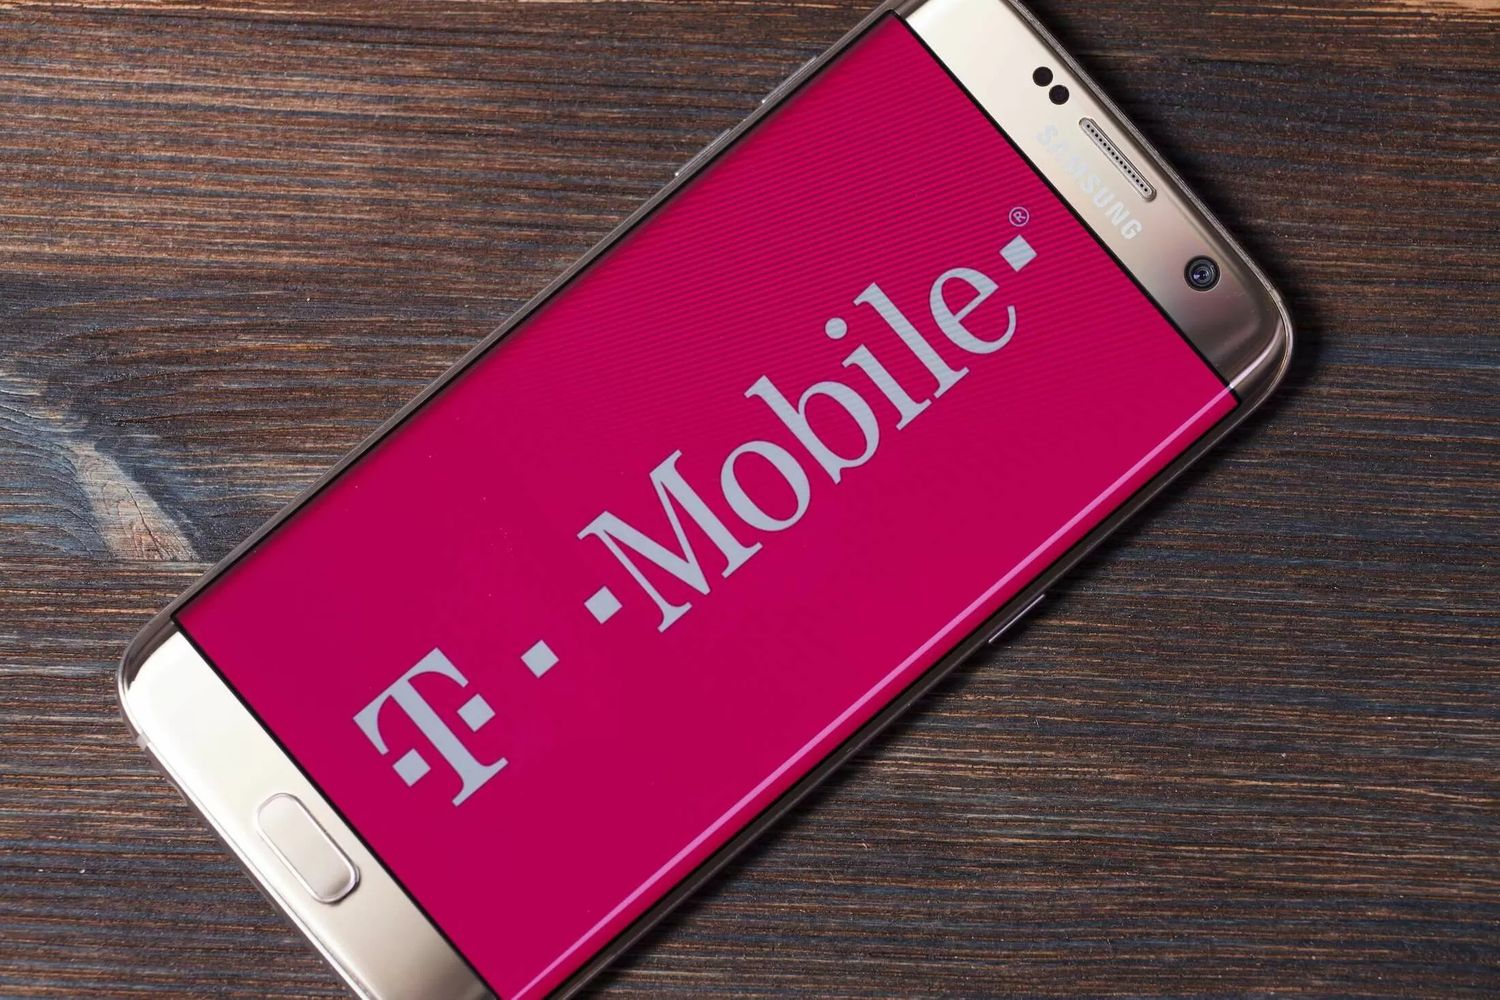 i-want-to-transfer-my-telephone-number-from-t-mobile-to-verizon-how-would-i-do-that